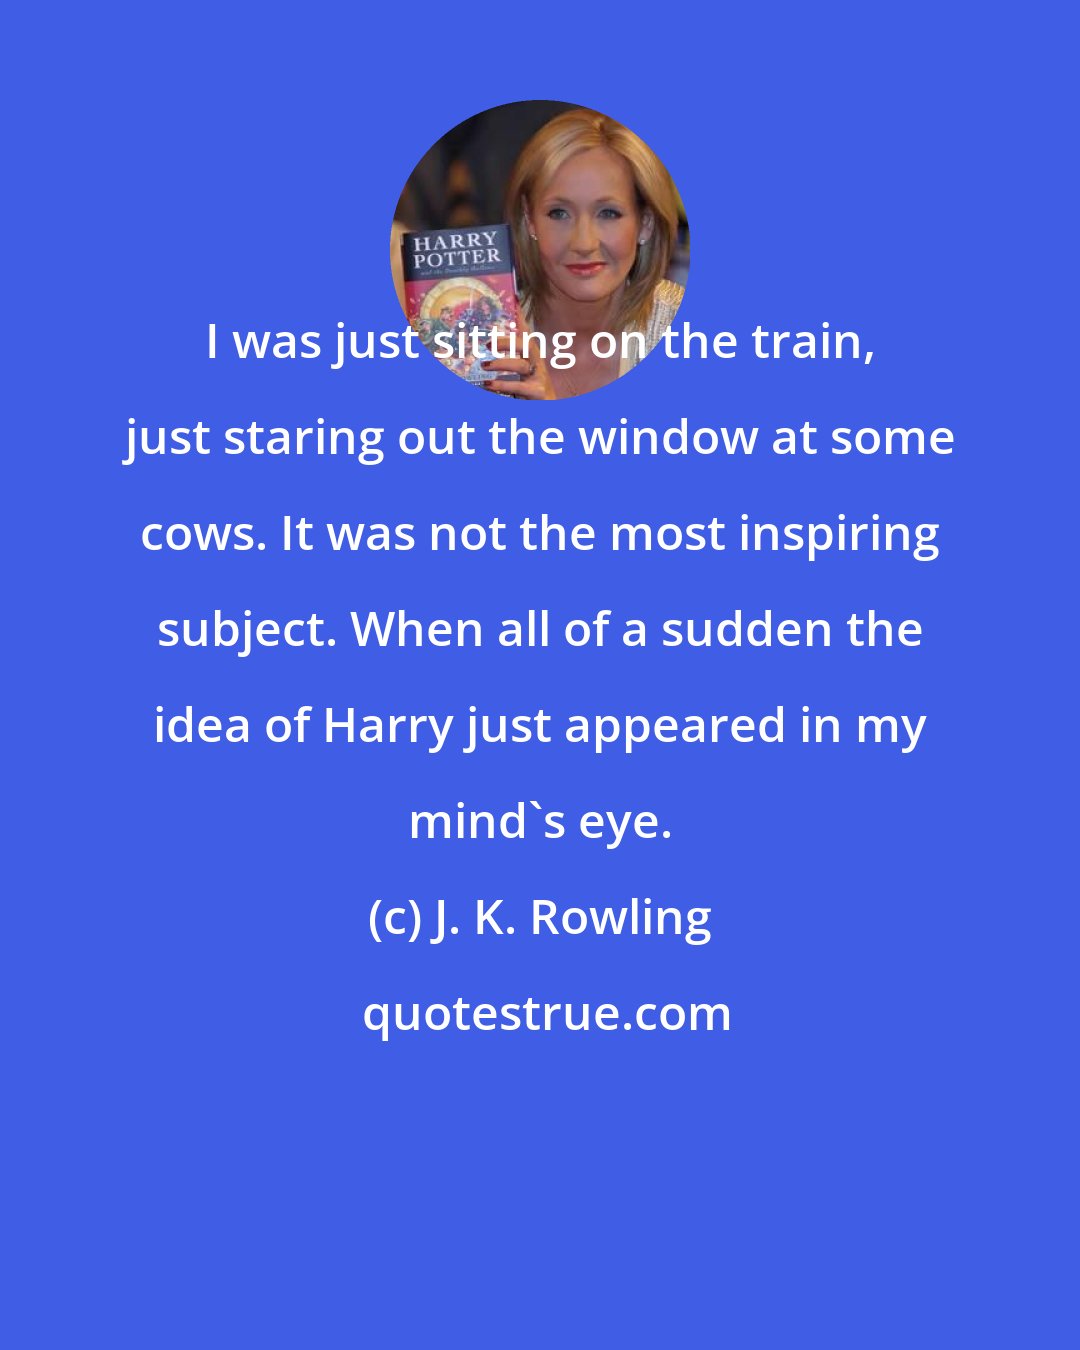 J. K. Rowling: I was just sitting on the train, just staring out the window at some cows. It was not the most inspiring subject. When all of a sudden the idea of Harry just appeared in my mind's eye.